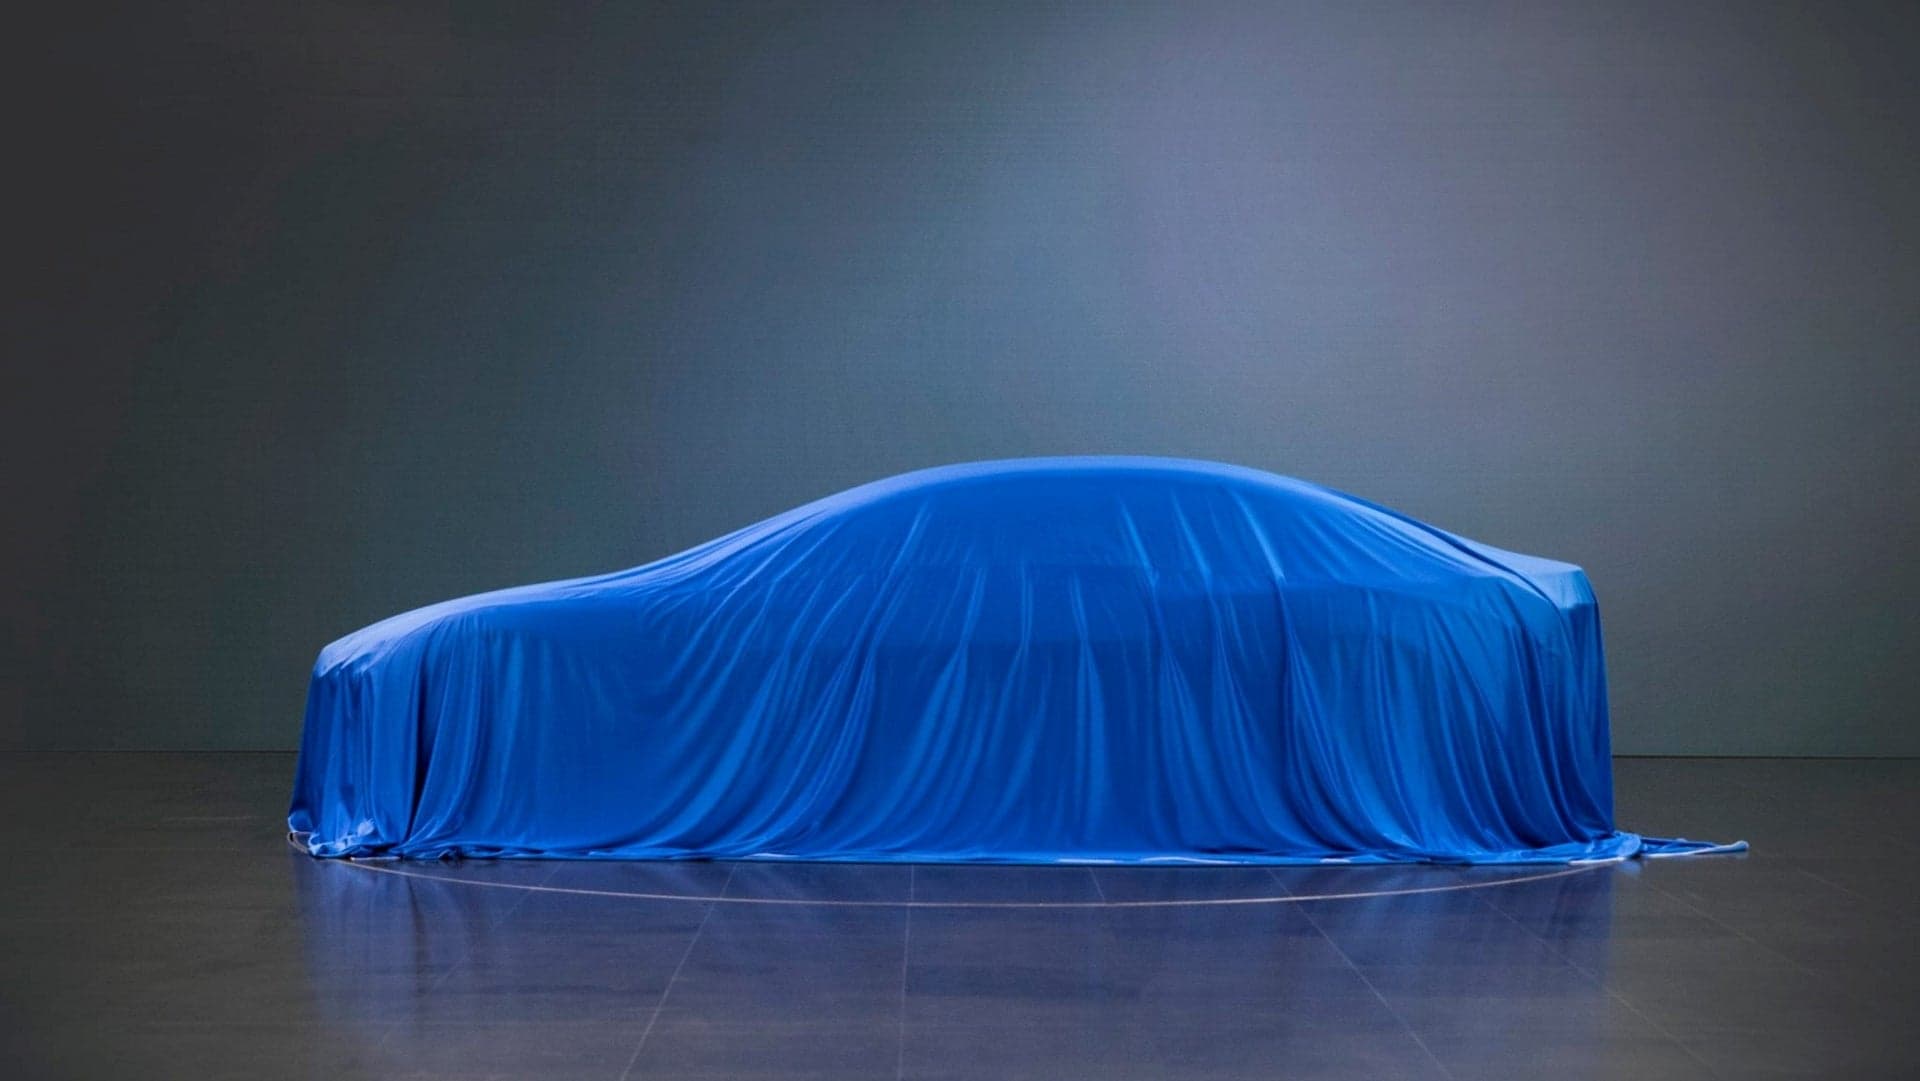 Sedan Likely Coming to the BMW i Hybrid-Electric Lineup